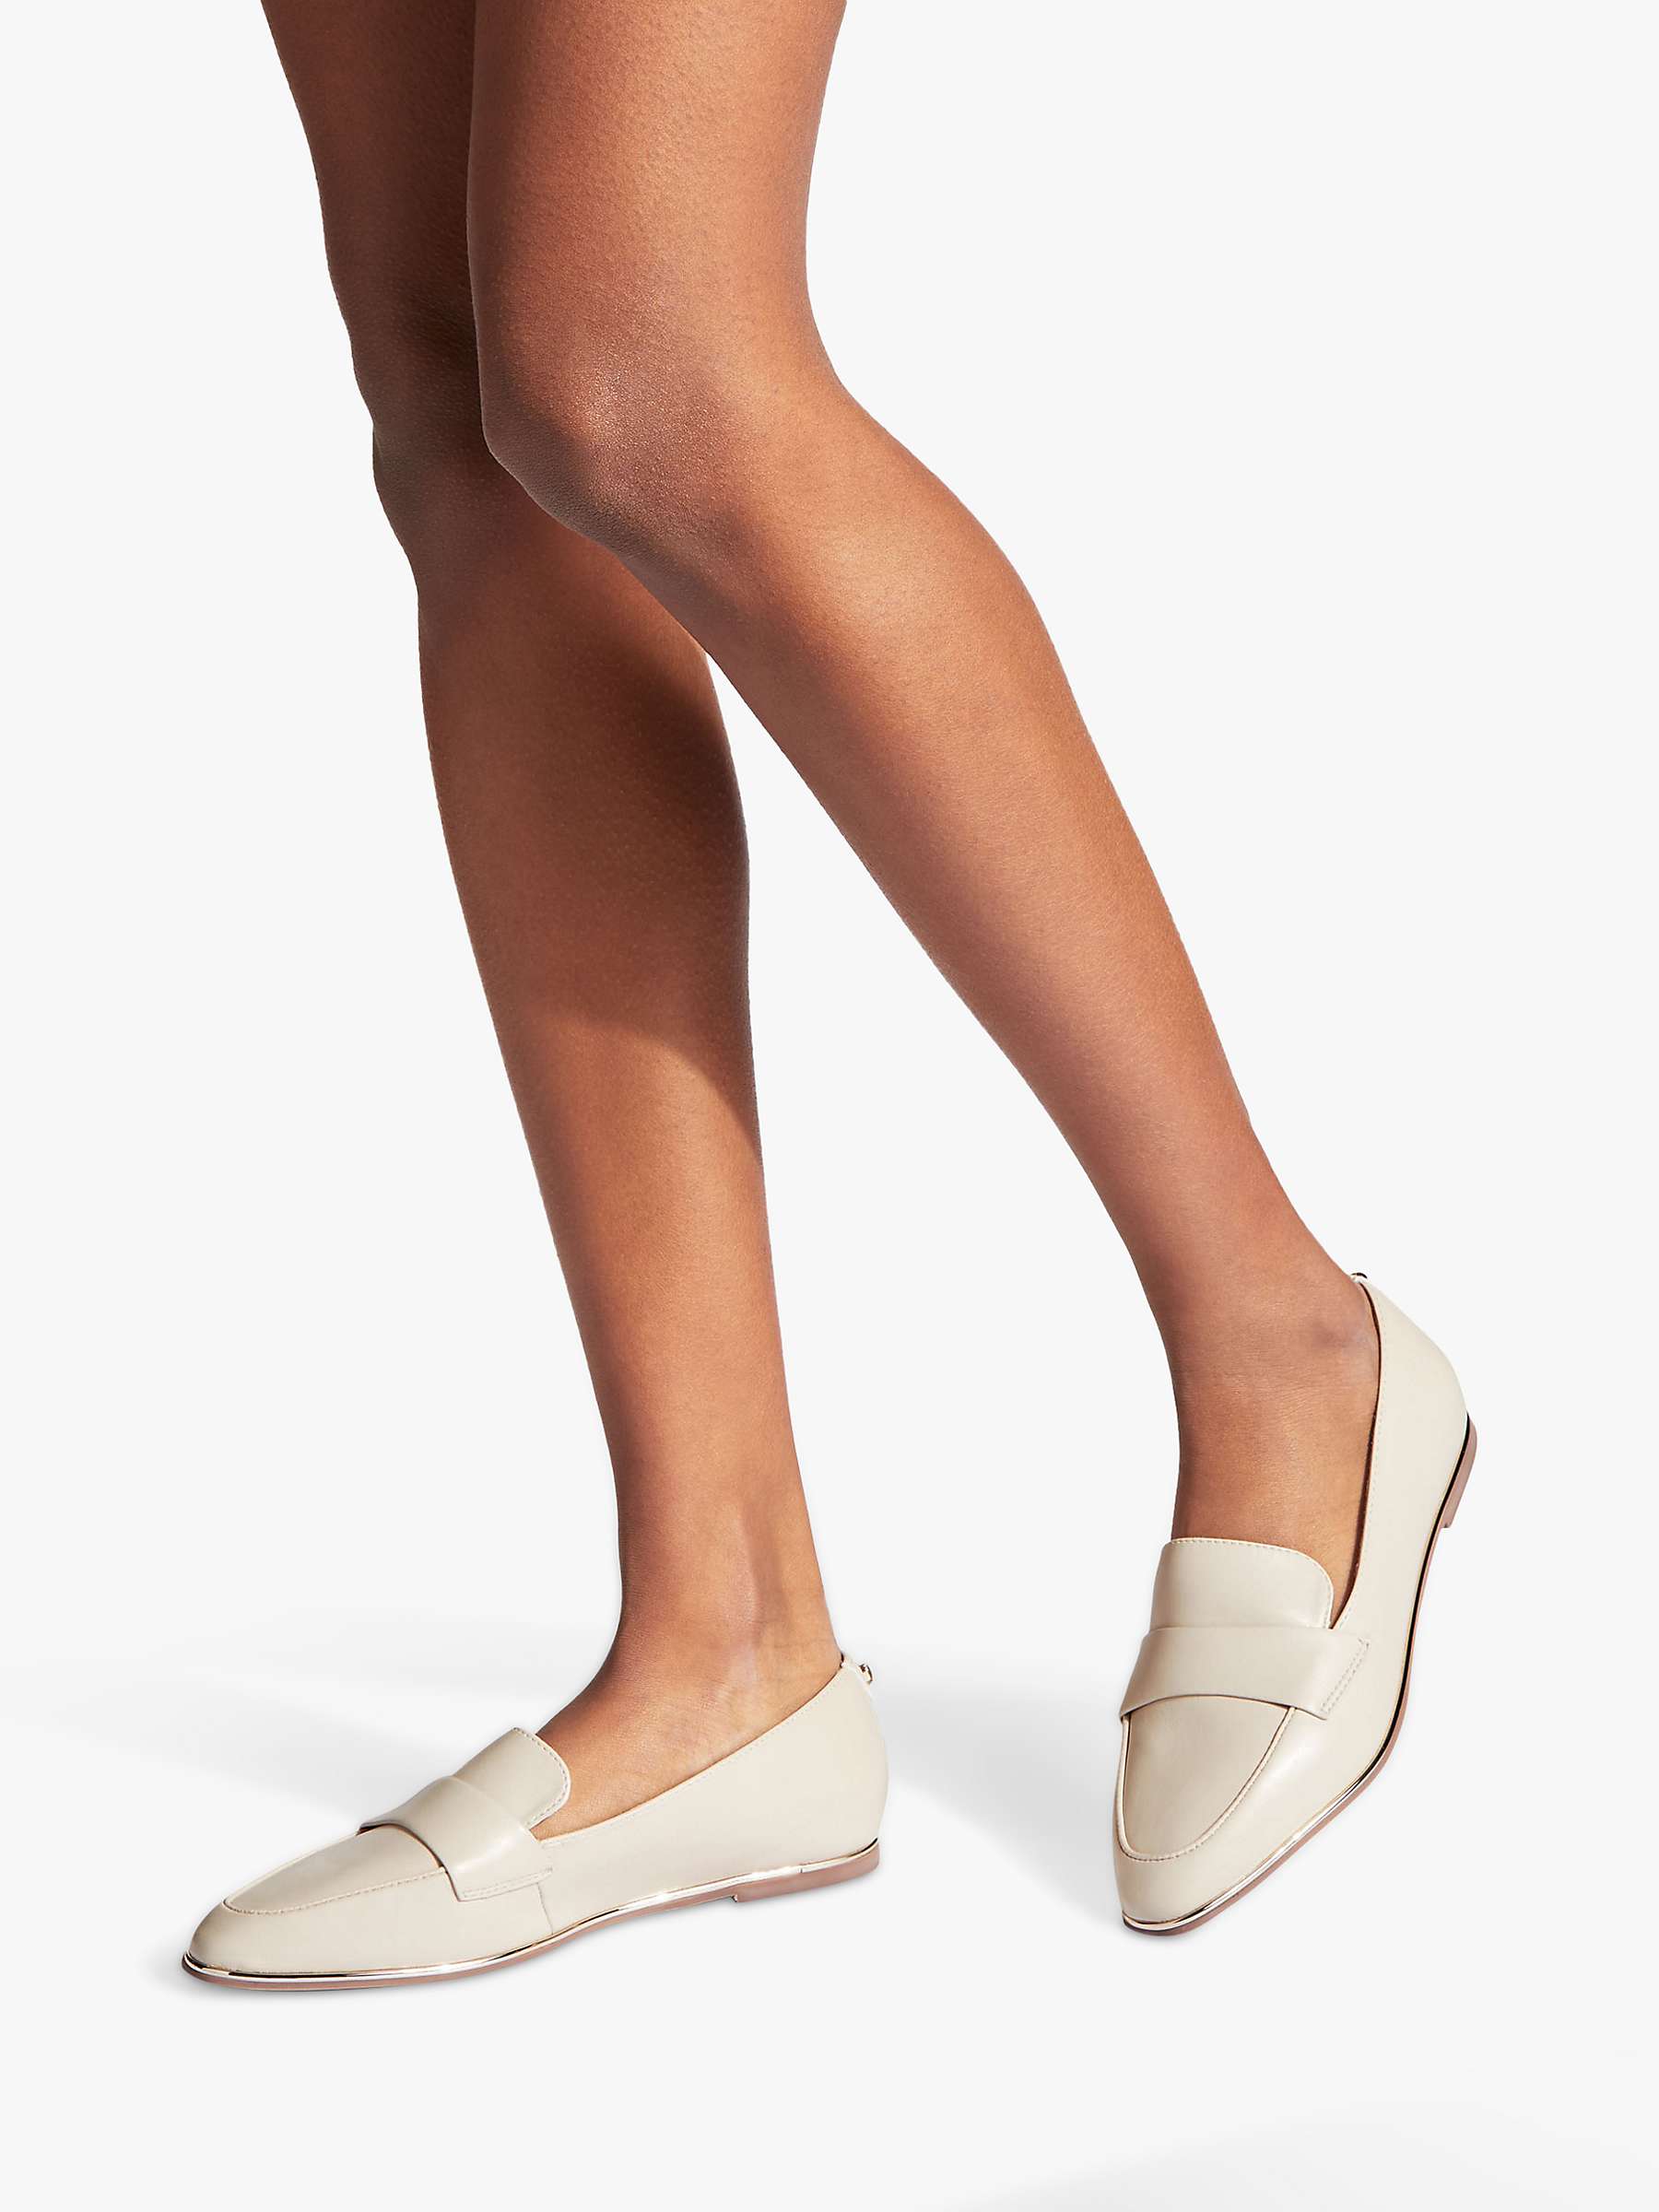 Buy Carvela Lexie Pointed Toe Loafers Online at johnlewis.com